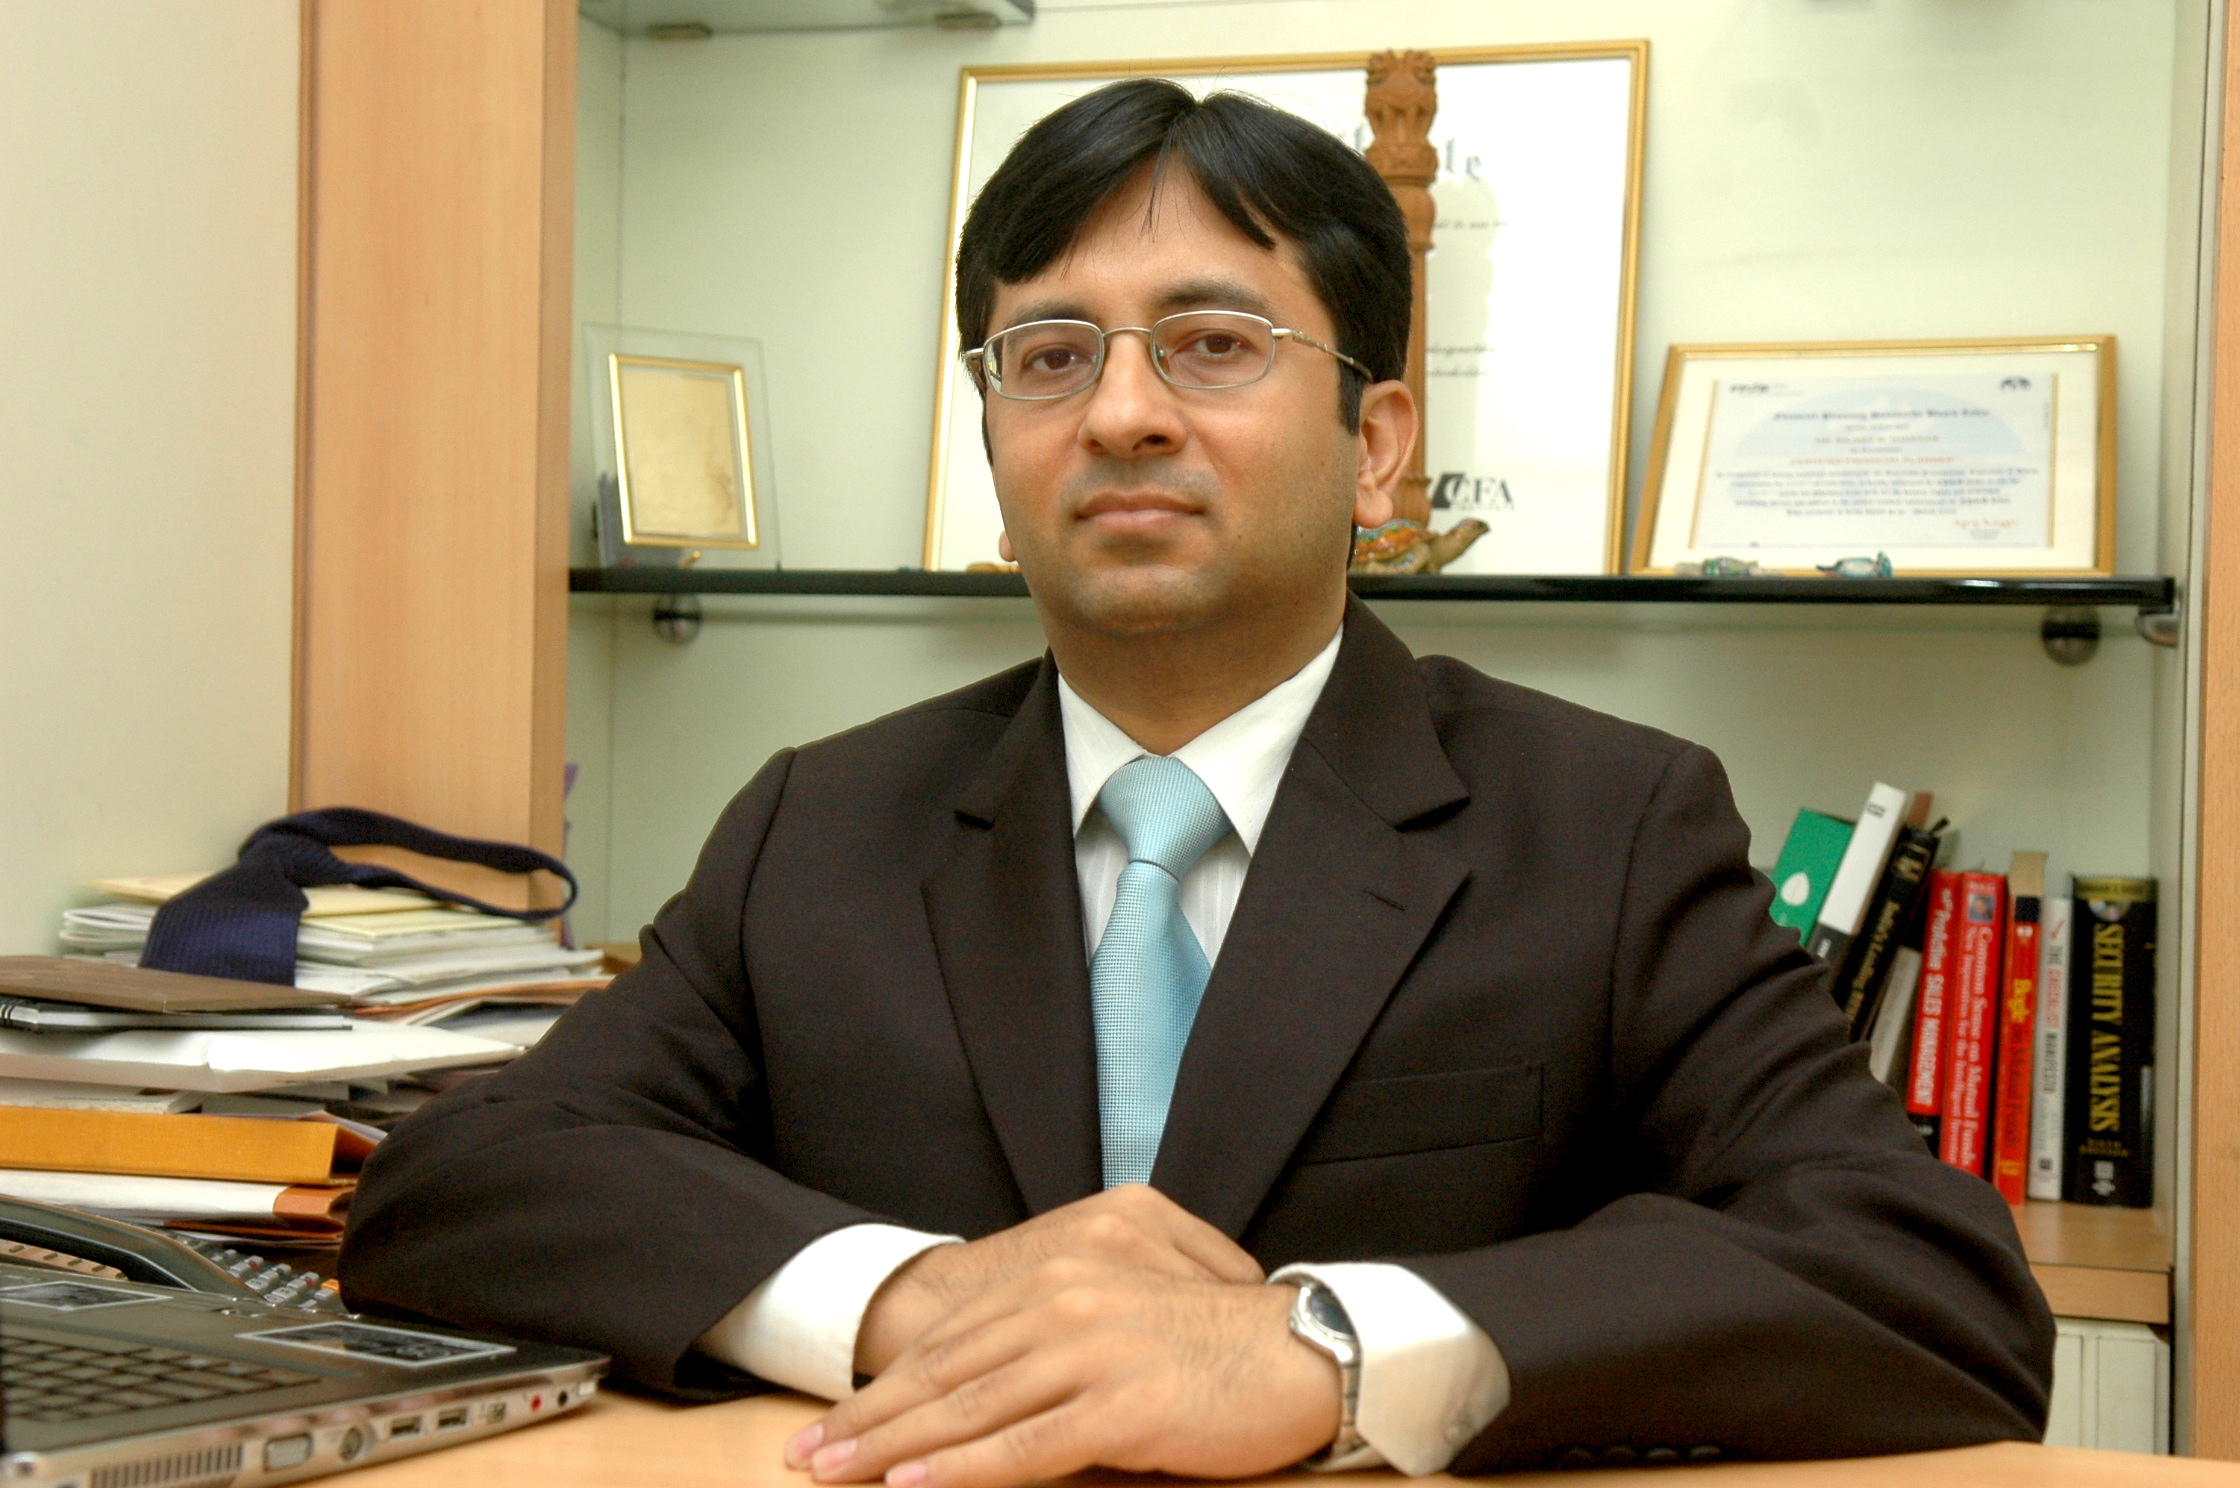 Time to look away from traditional energy companies: Rajeev Thakkar